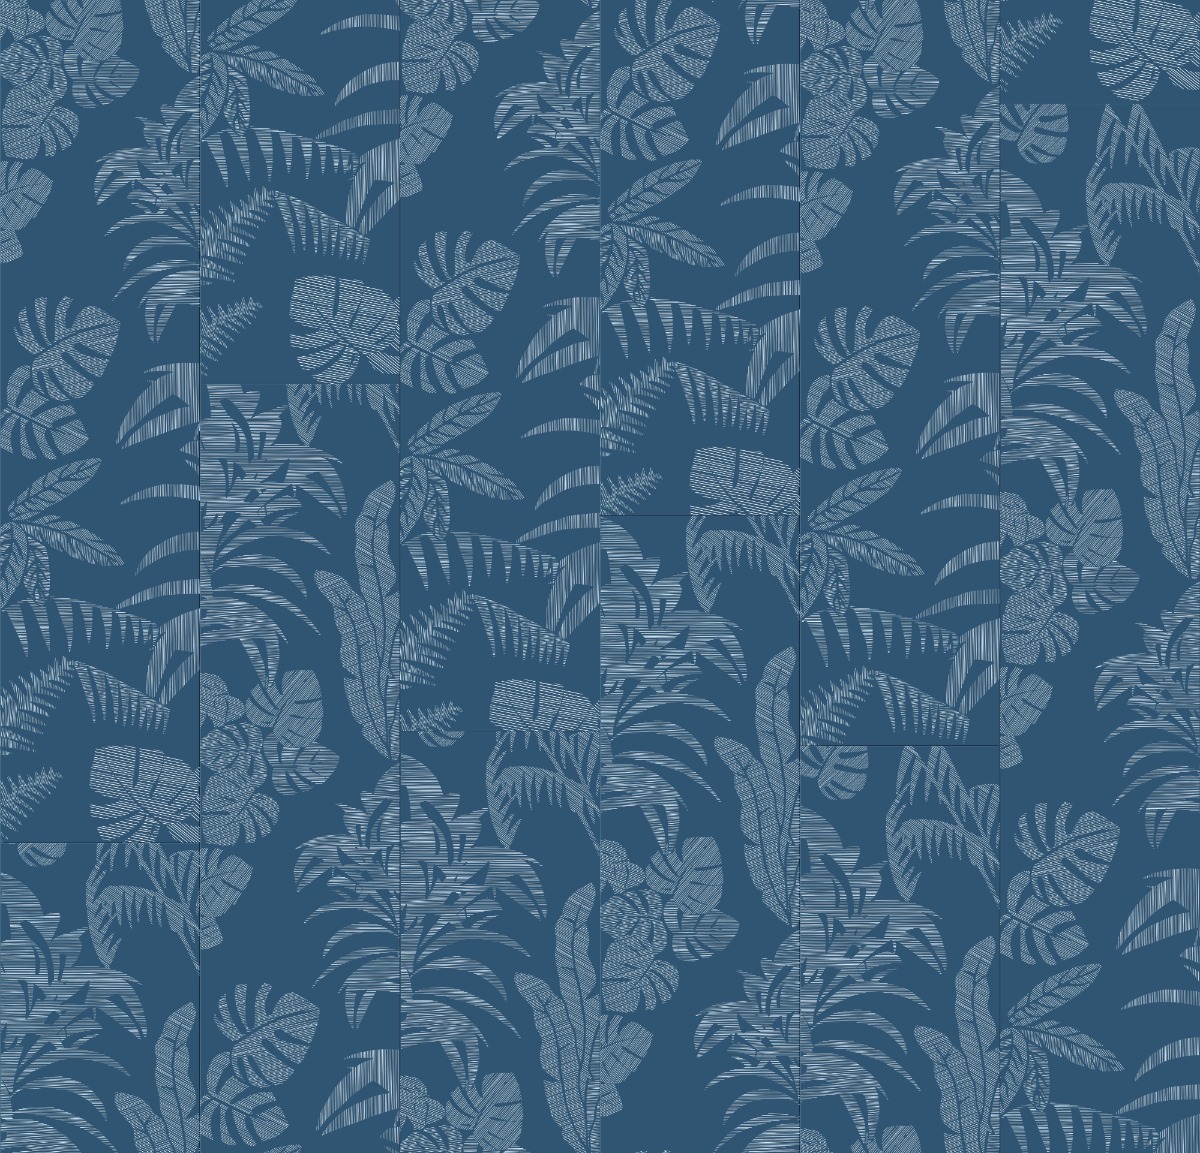 A seamless wallpaper texture with flourish wallpaper in coast units arranged in a  pattern